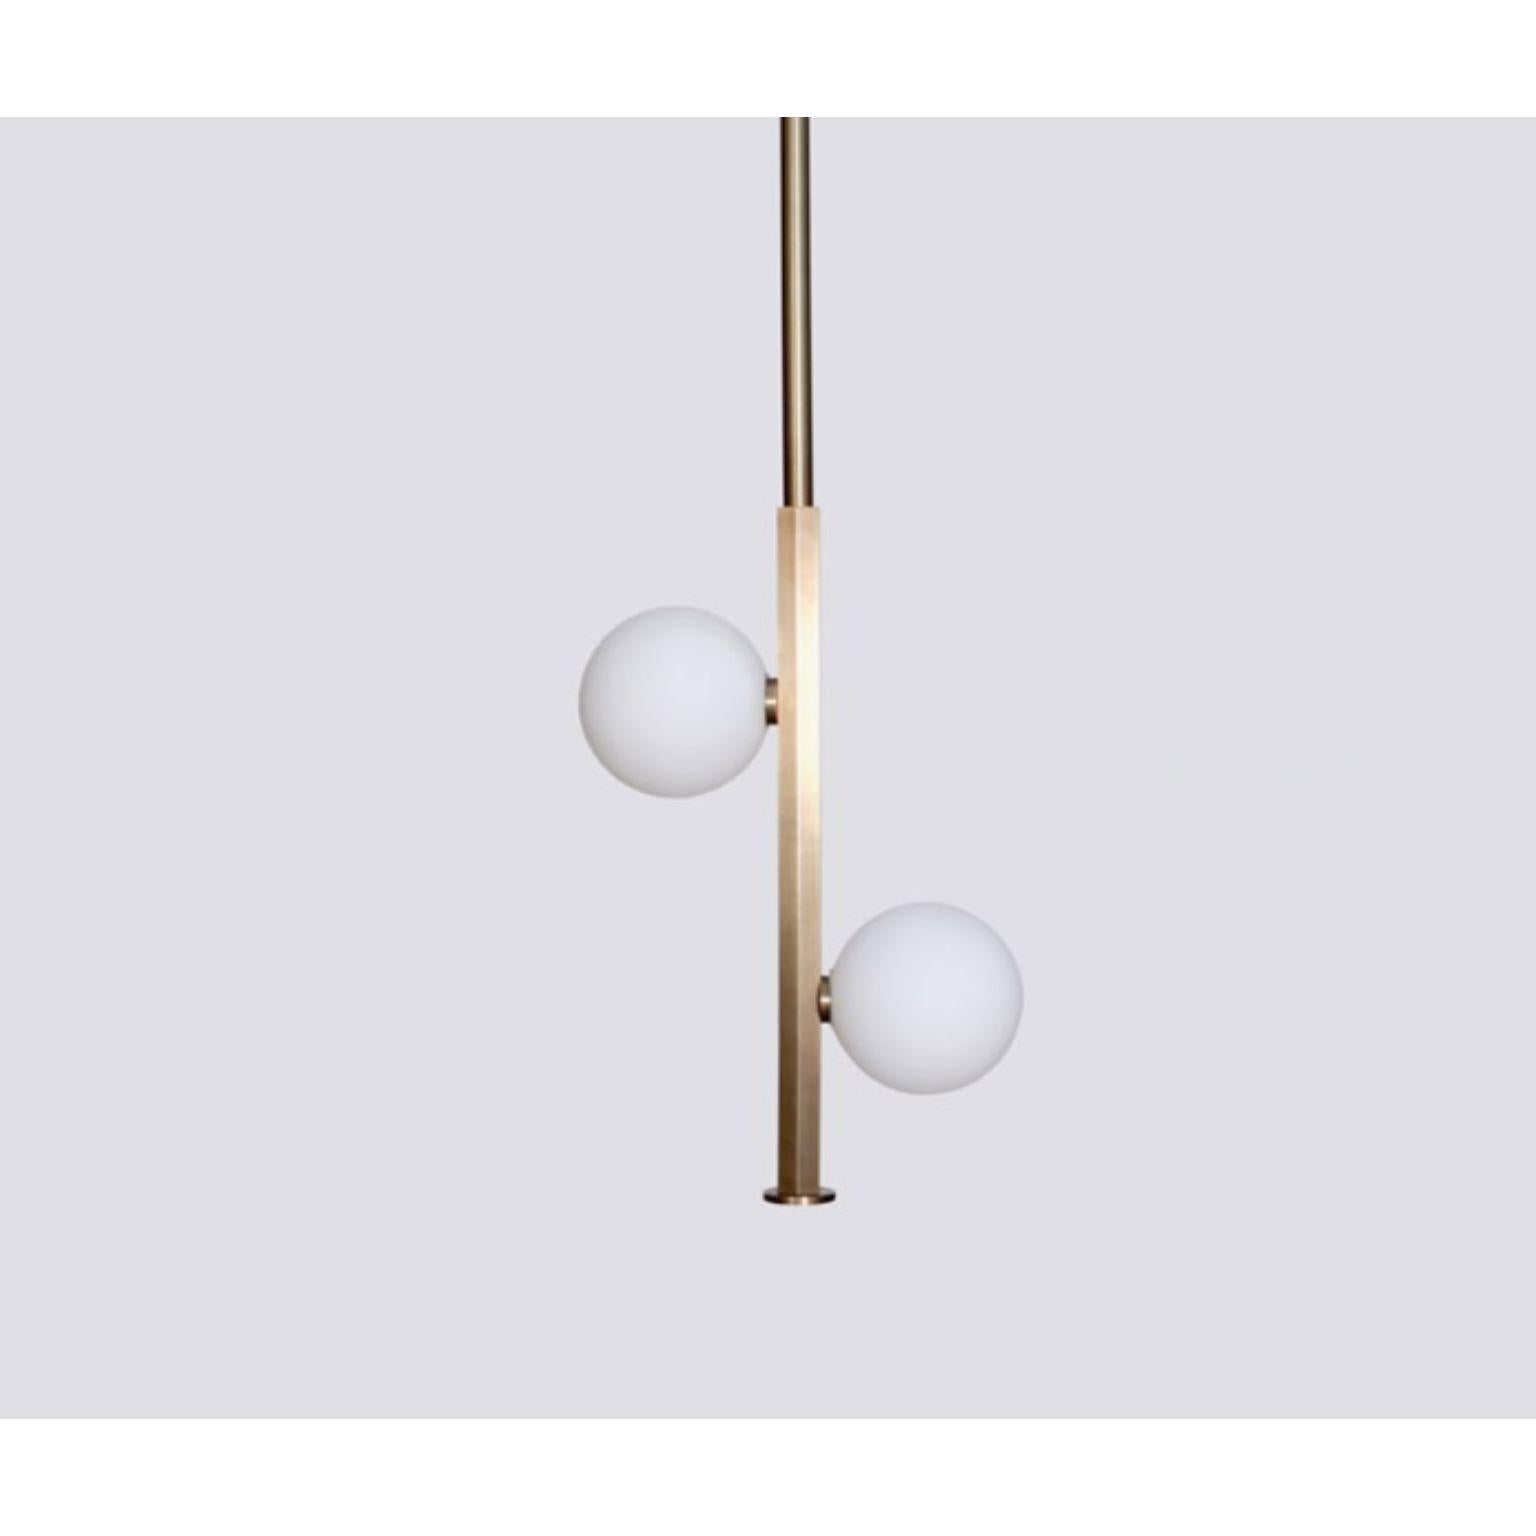 Stem 2 Glass Globe Pendant Lamp by Lamp Shaper
Dimensions: D 23 x W 23 x H 101.5 cm.
Materials: Brass and glass.

Different finishes available: raw brass, aged brass, burnt brass and brushed brass Please contact us.

All our lamps can be wired